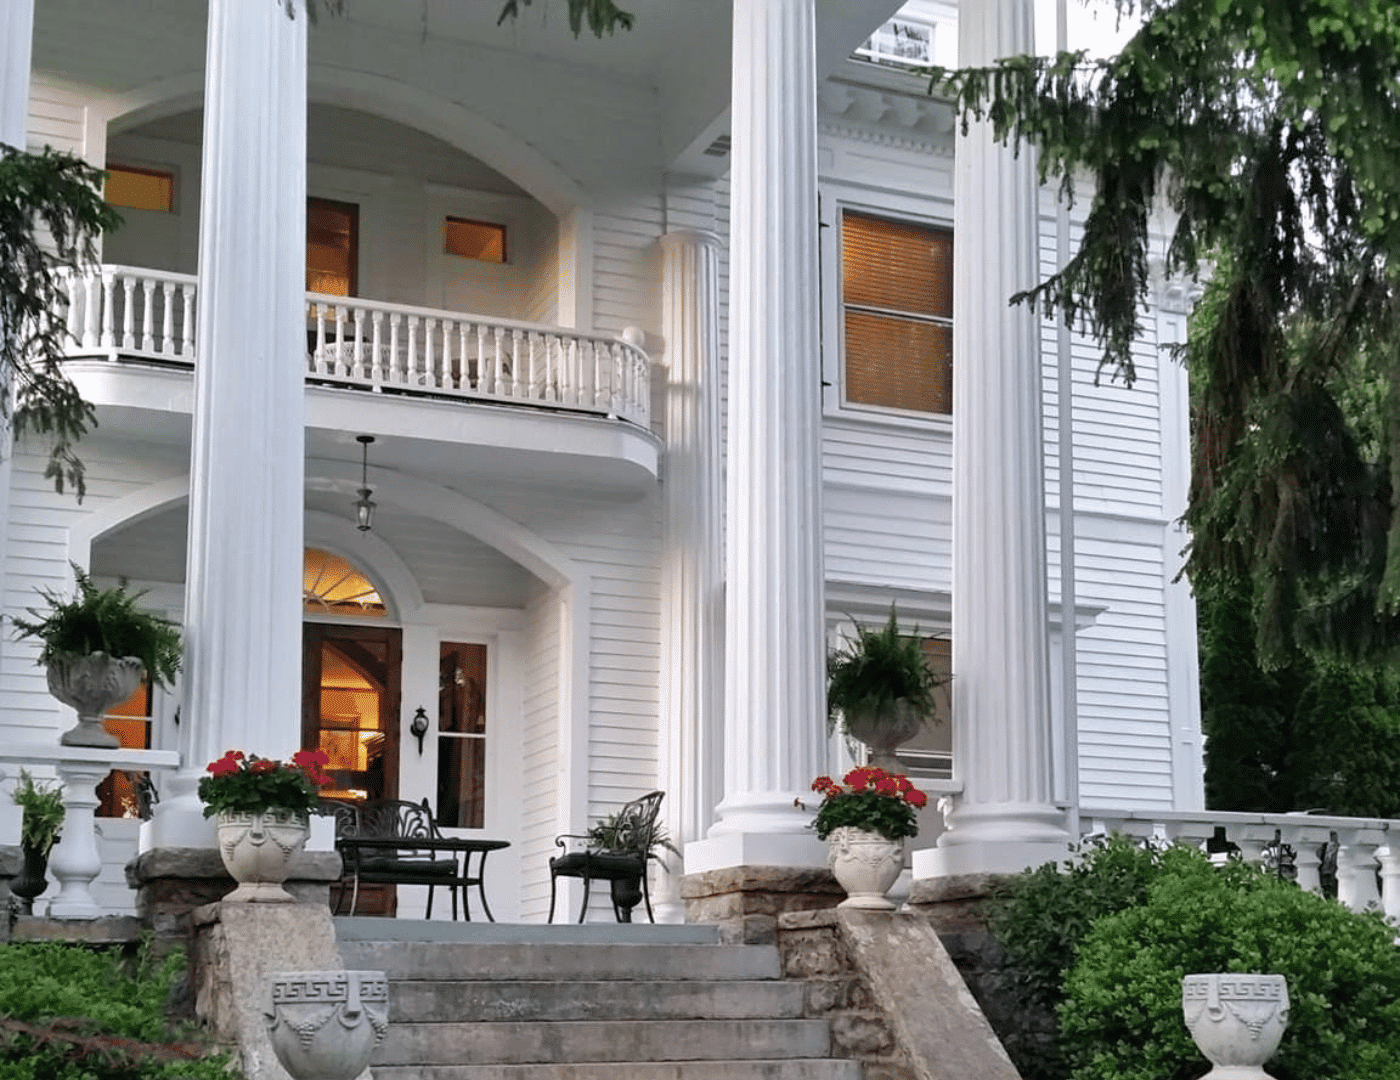 ext porch of b&b with stone steps, white columns, porch and patio furniture